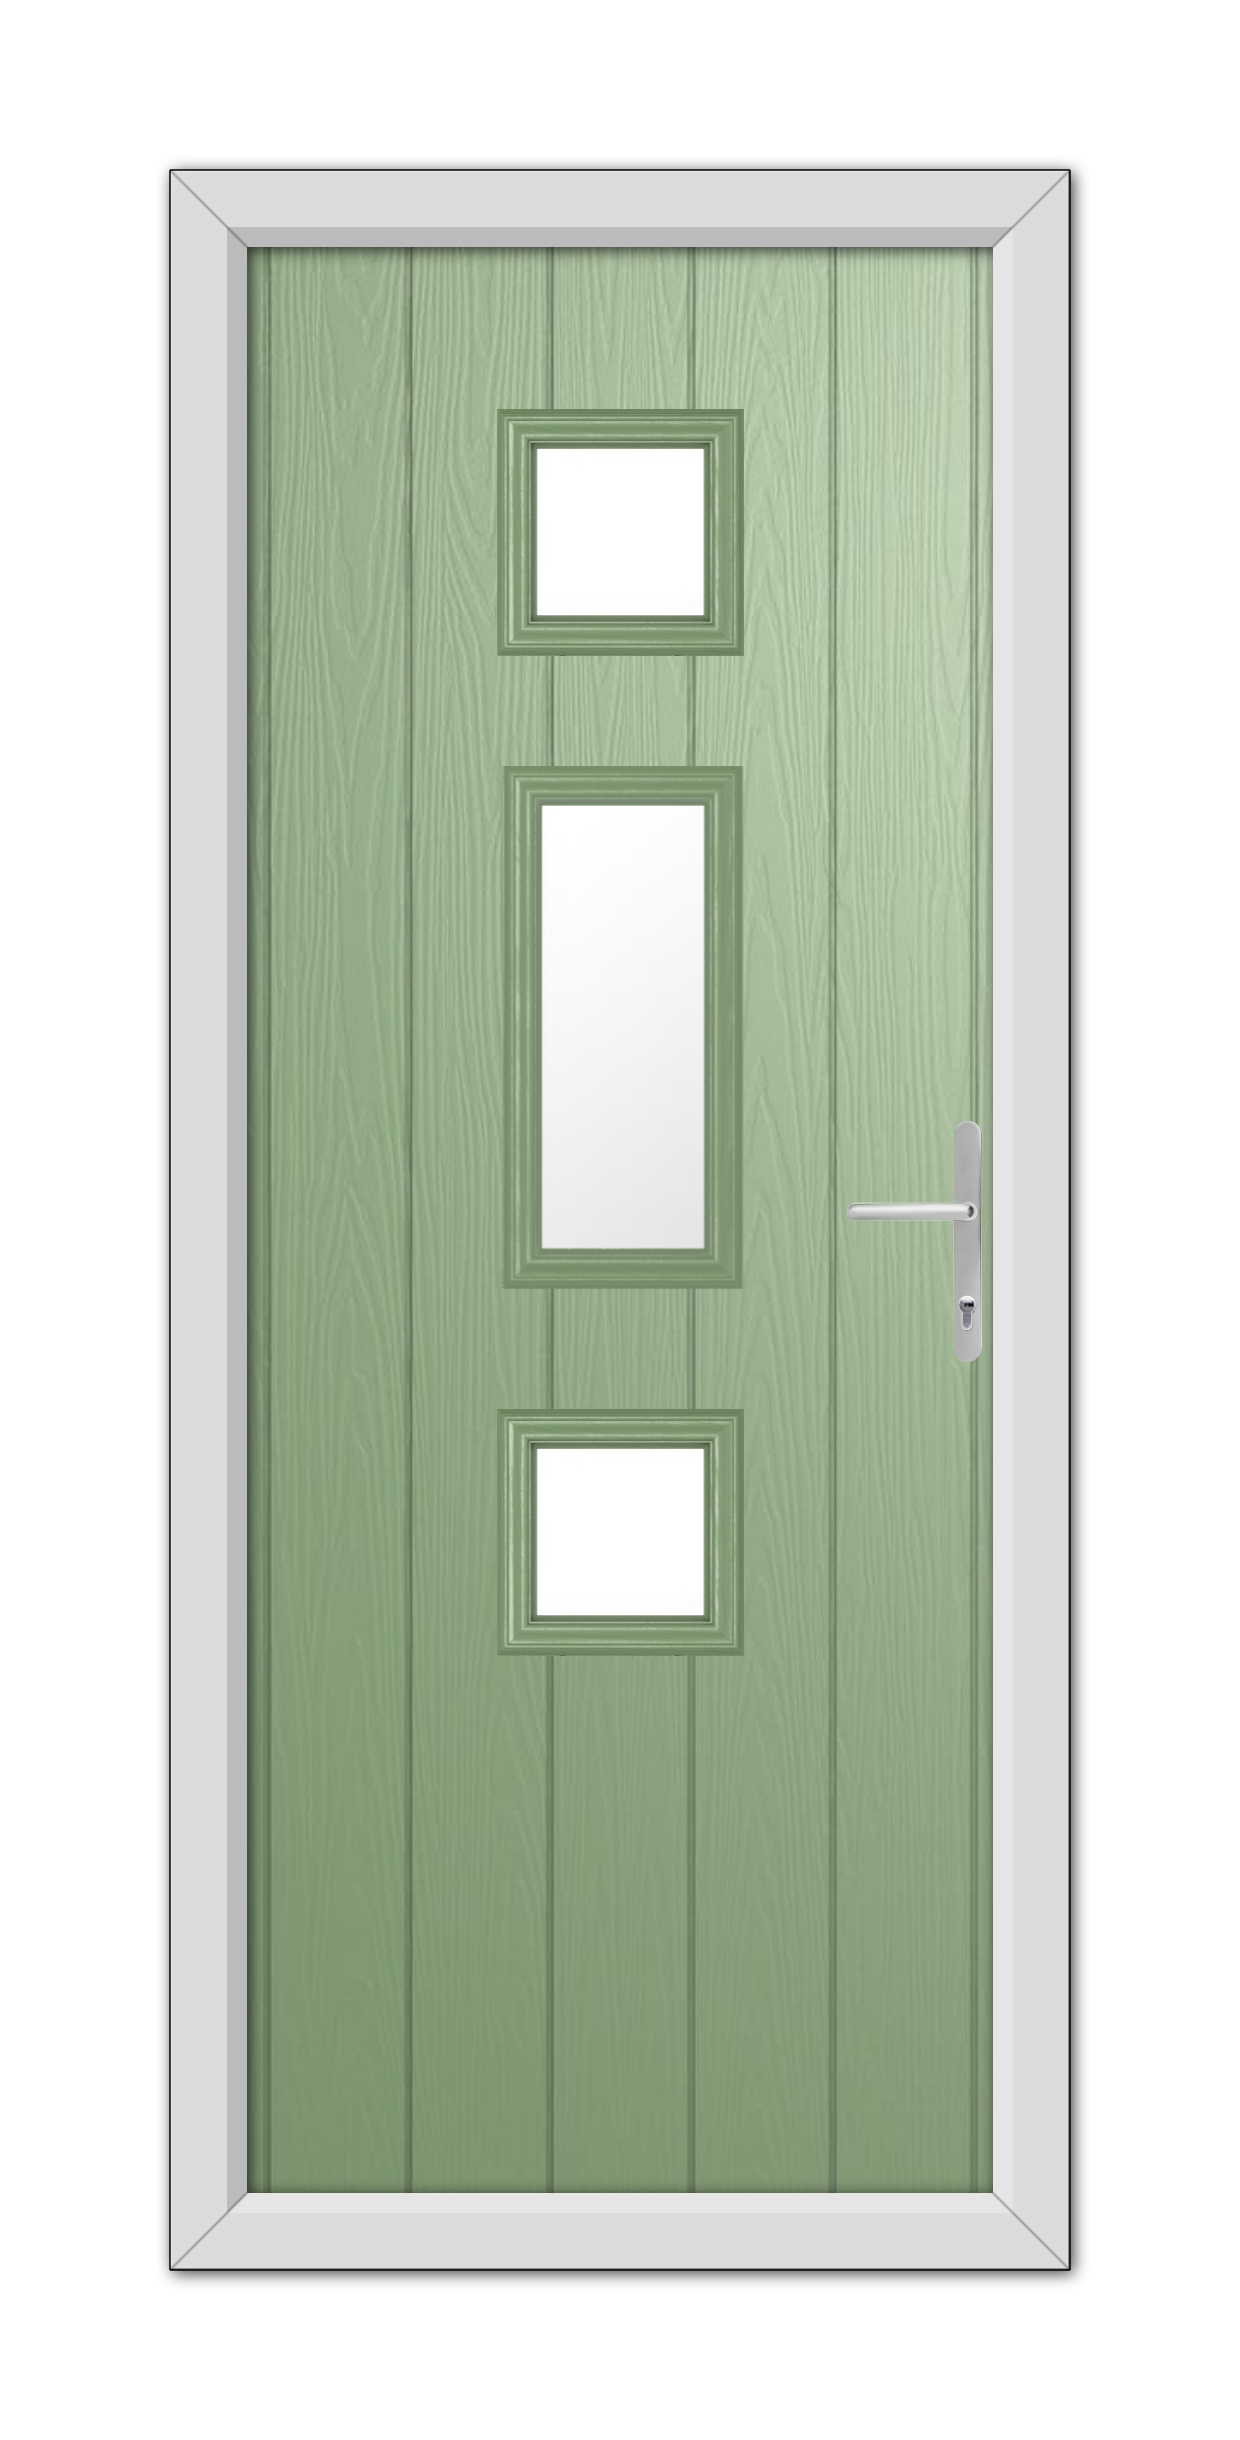 A Chartwell Green York Composite Door 48mm Timber Core with three rectangular glass panels and a modern handle, set within a grey frame.